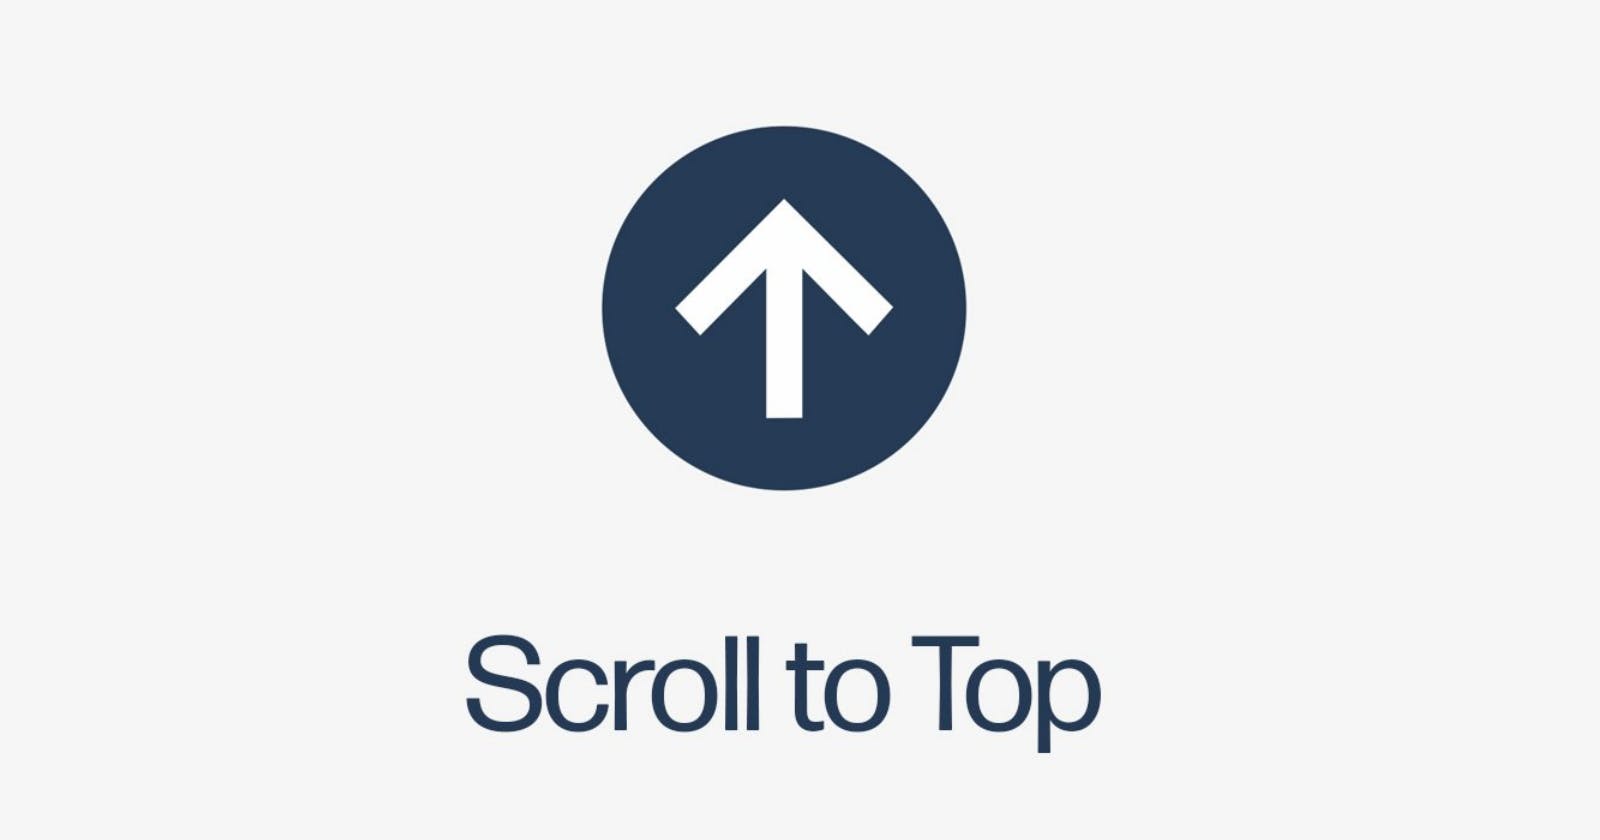 How to create a scroll to top button with vanilla JS & CSS